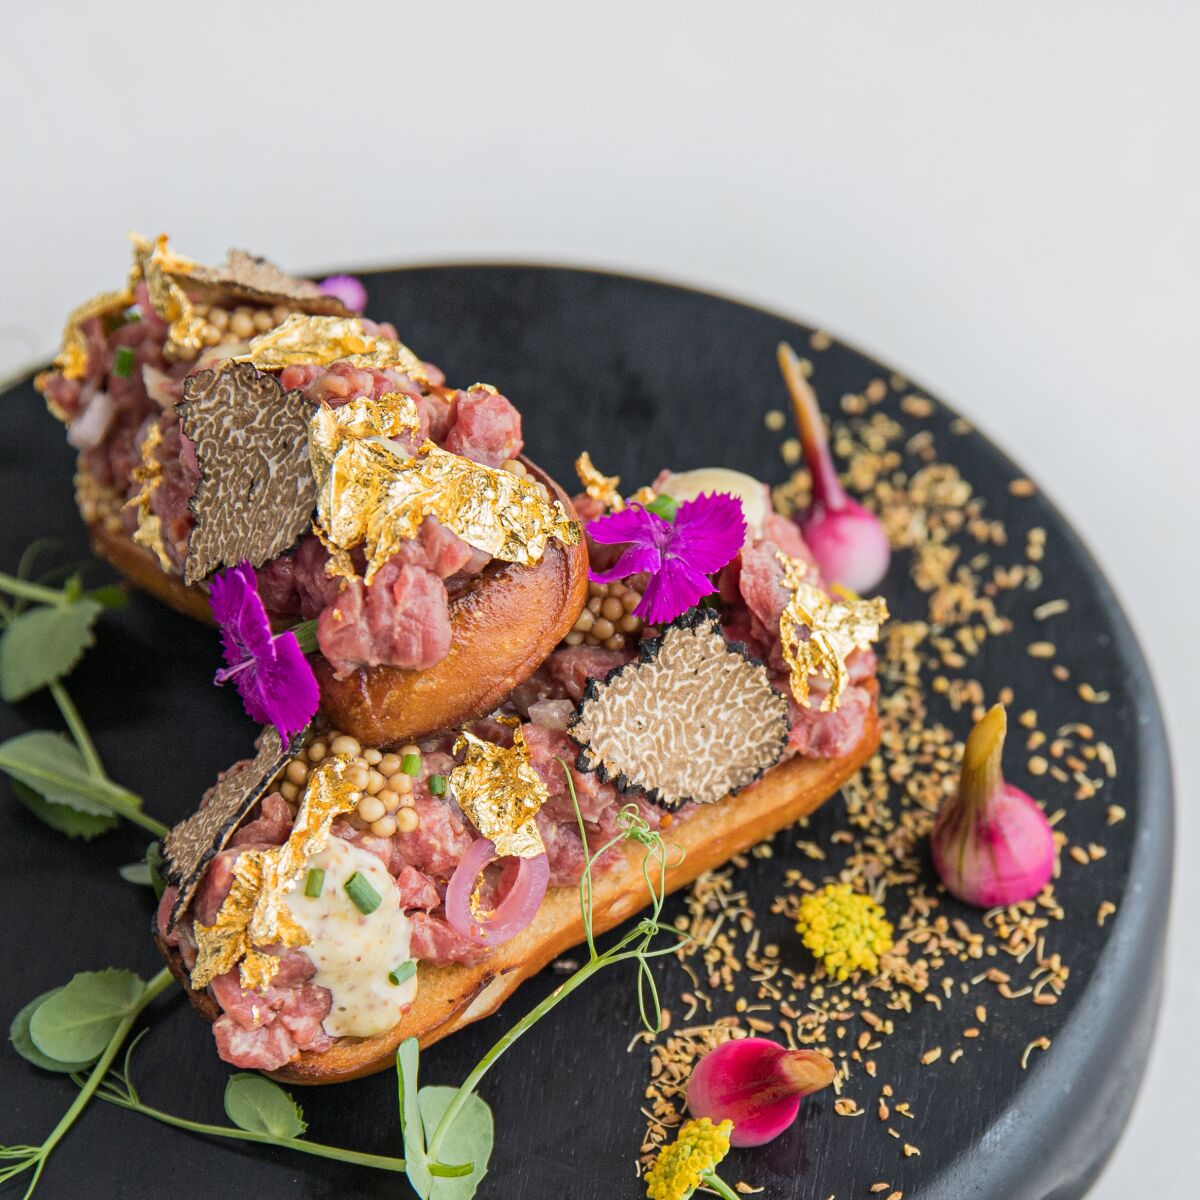 The beef tartare with black truffle and edible gold leaf on baguette at the Lounge at Marine Room.